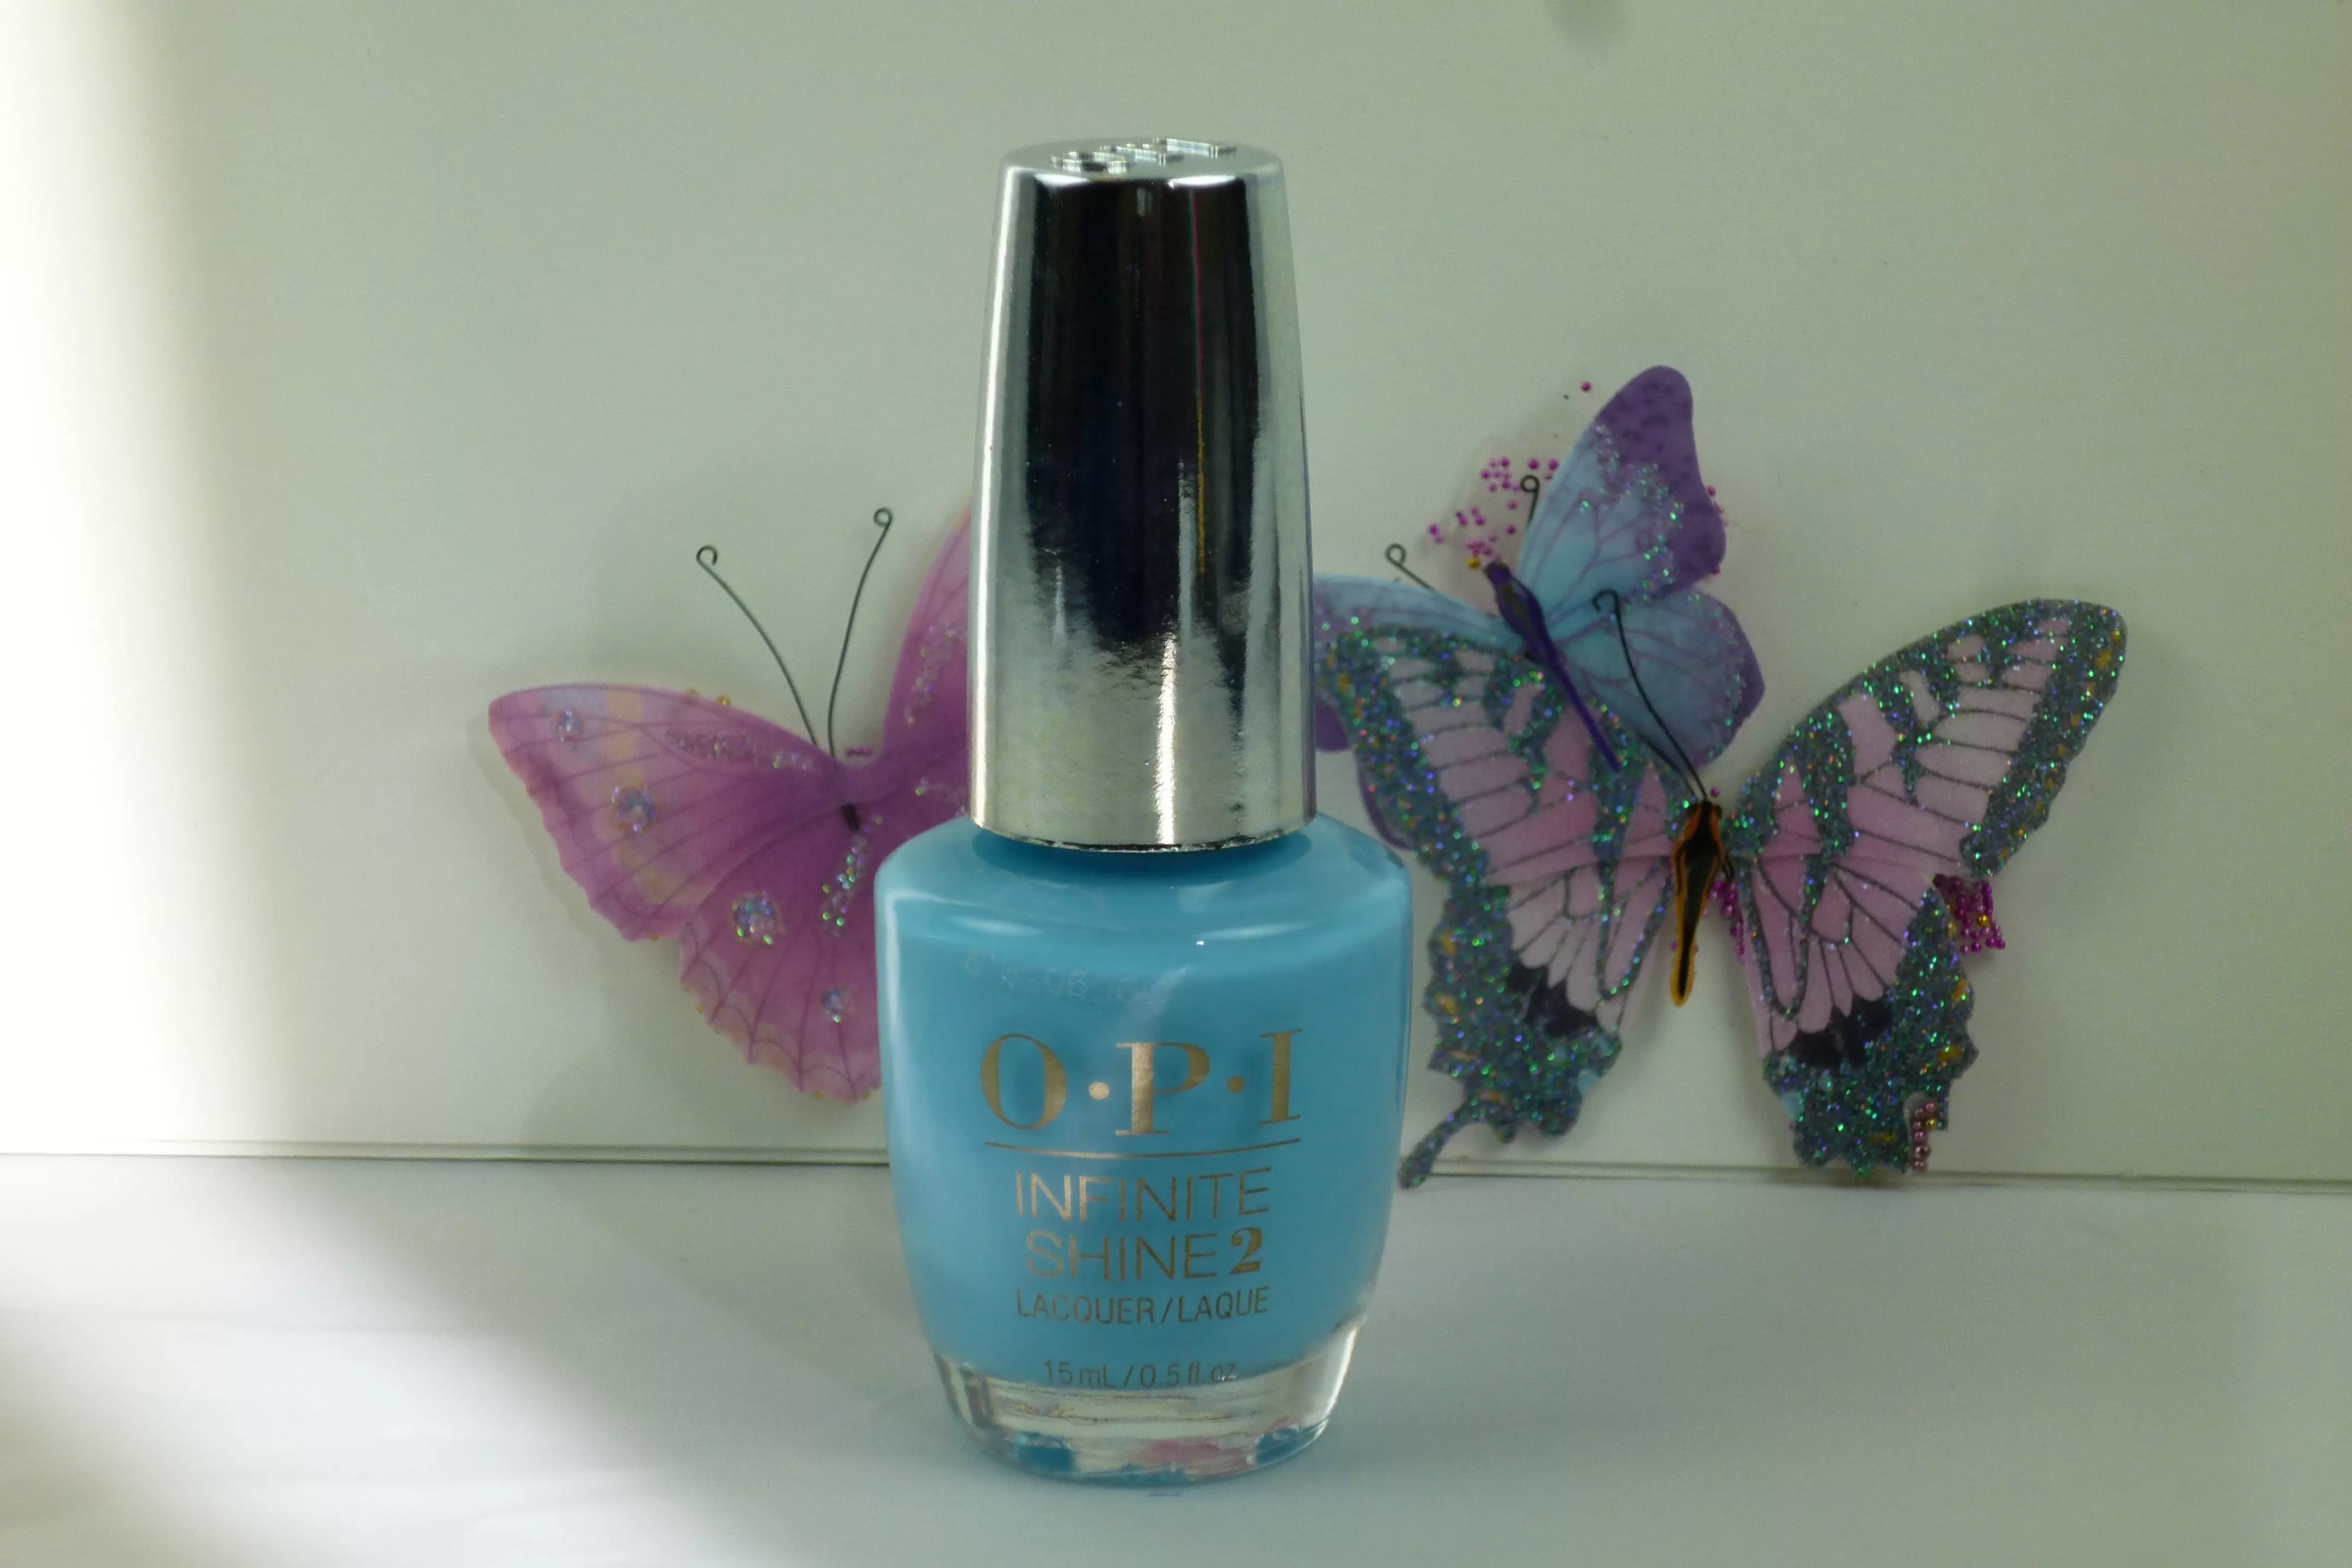 OPI Infinite Shine Nail Polish in "To Infinity & Blue-yond" - wide 5